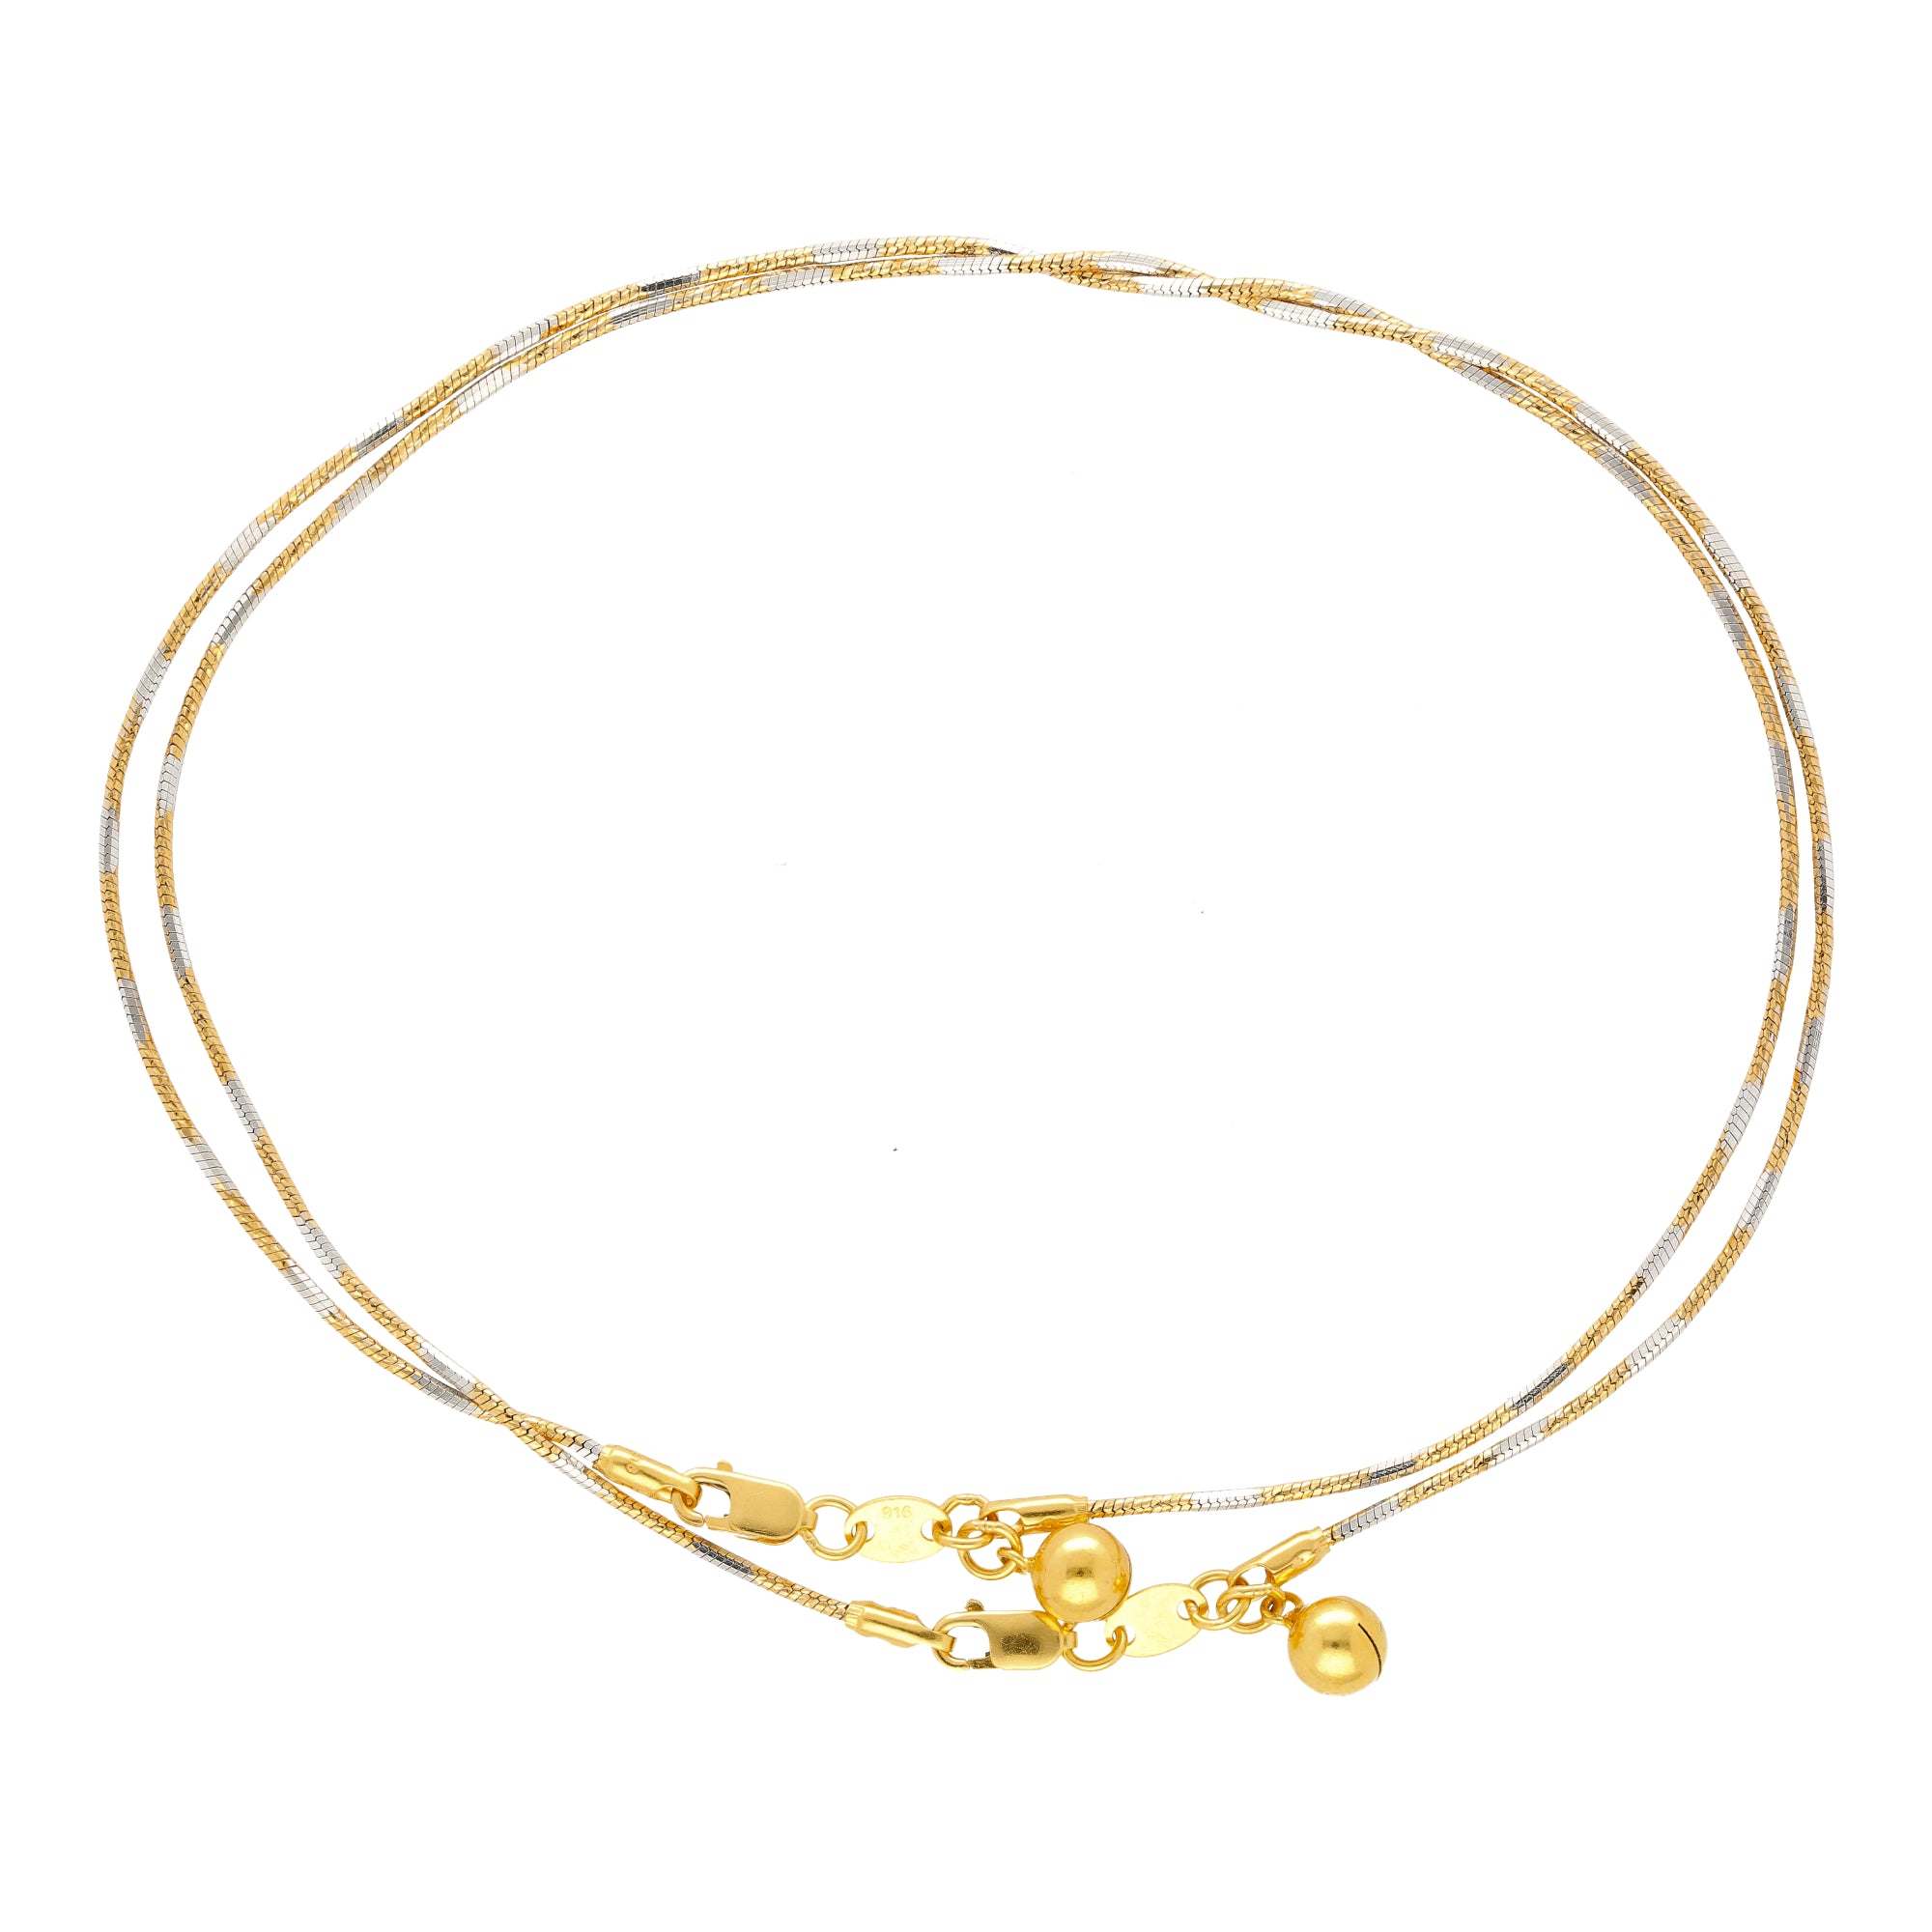 22K Muti-Tone Gold Rope Anklets (9 grams)